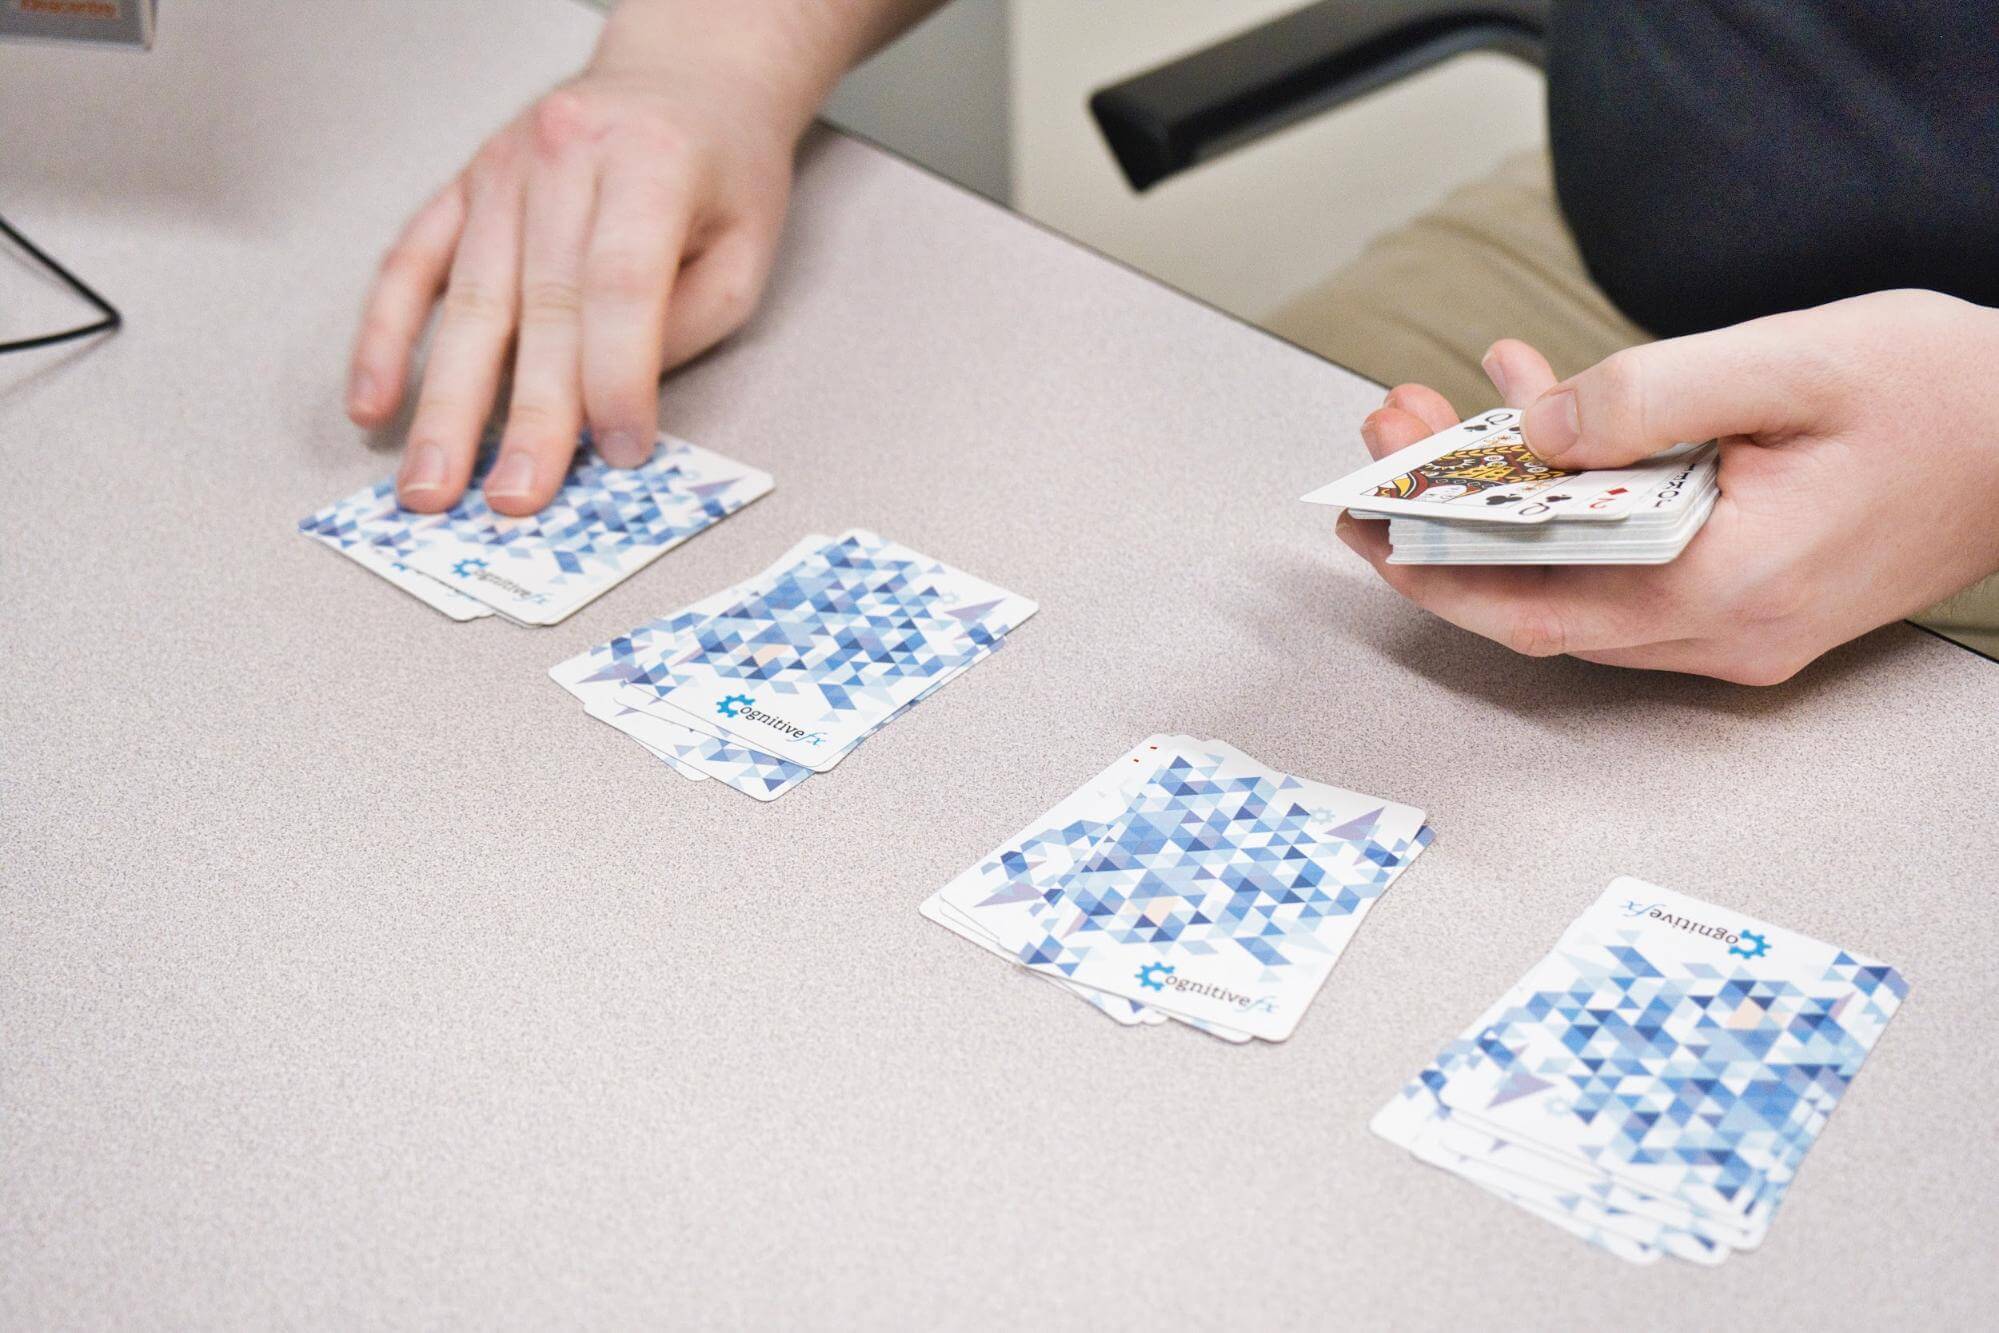 Patient demonstrates a card game for treatment. 